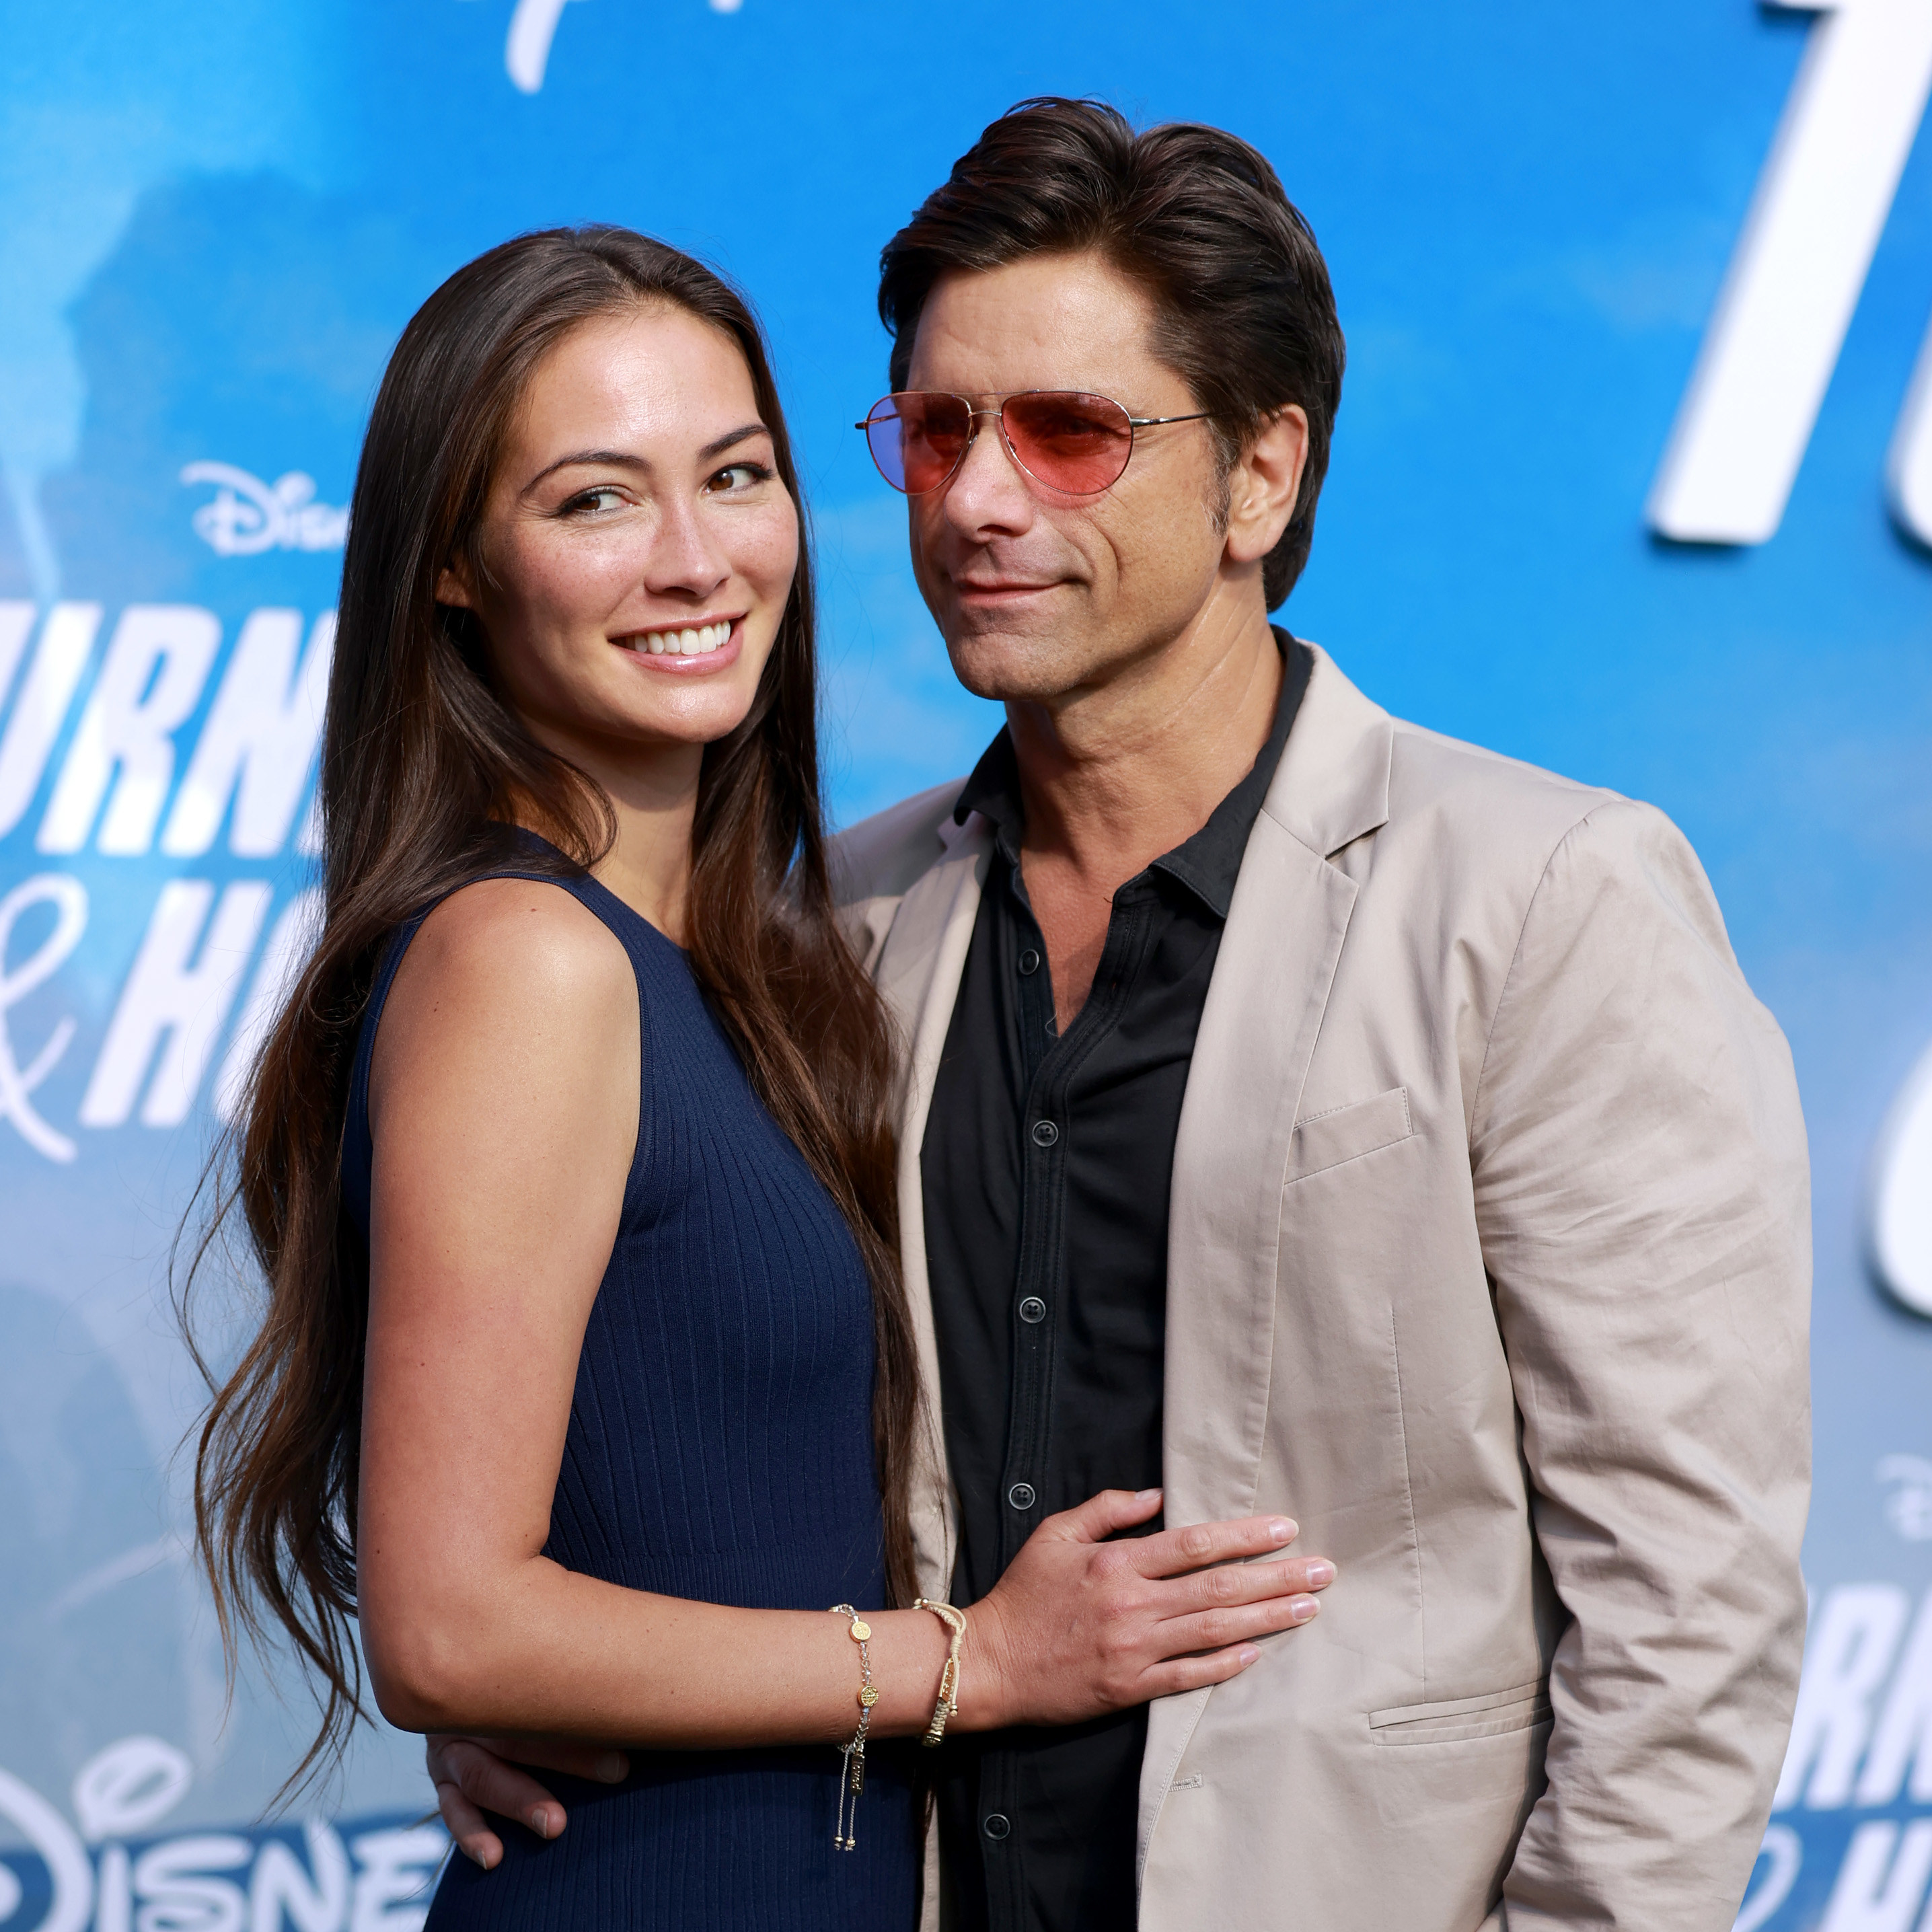 Caitlin McHugh and John Stamos attend the Disney+ &quot;Turner &amp; Hooch&quot; Premiere at Westfield Century City Mall on July 15, 2021